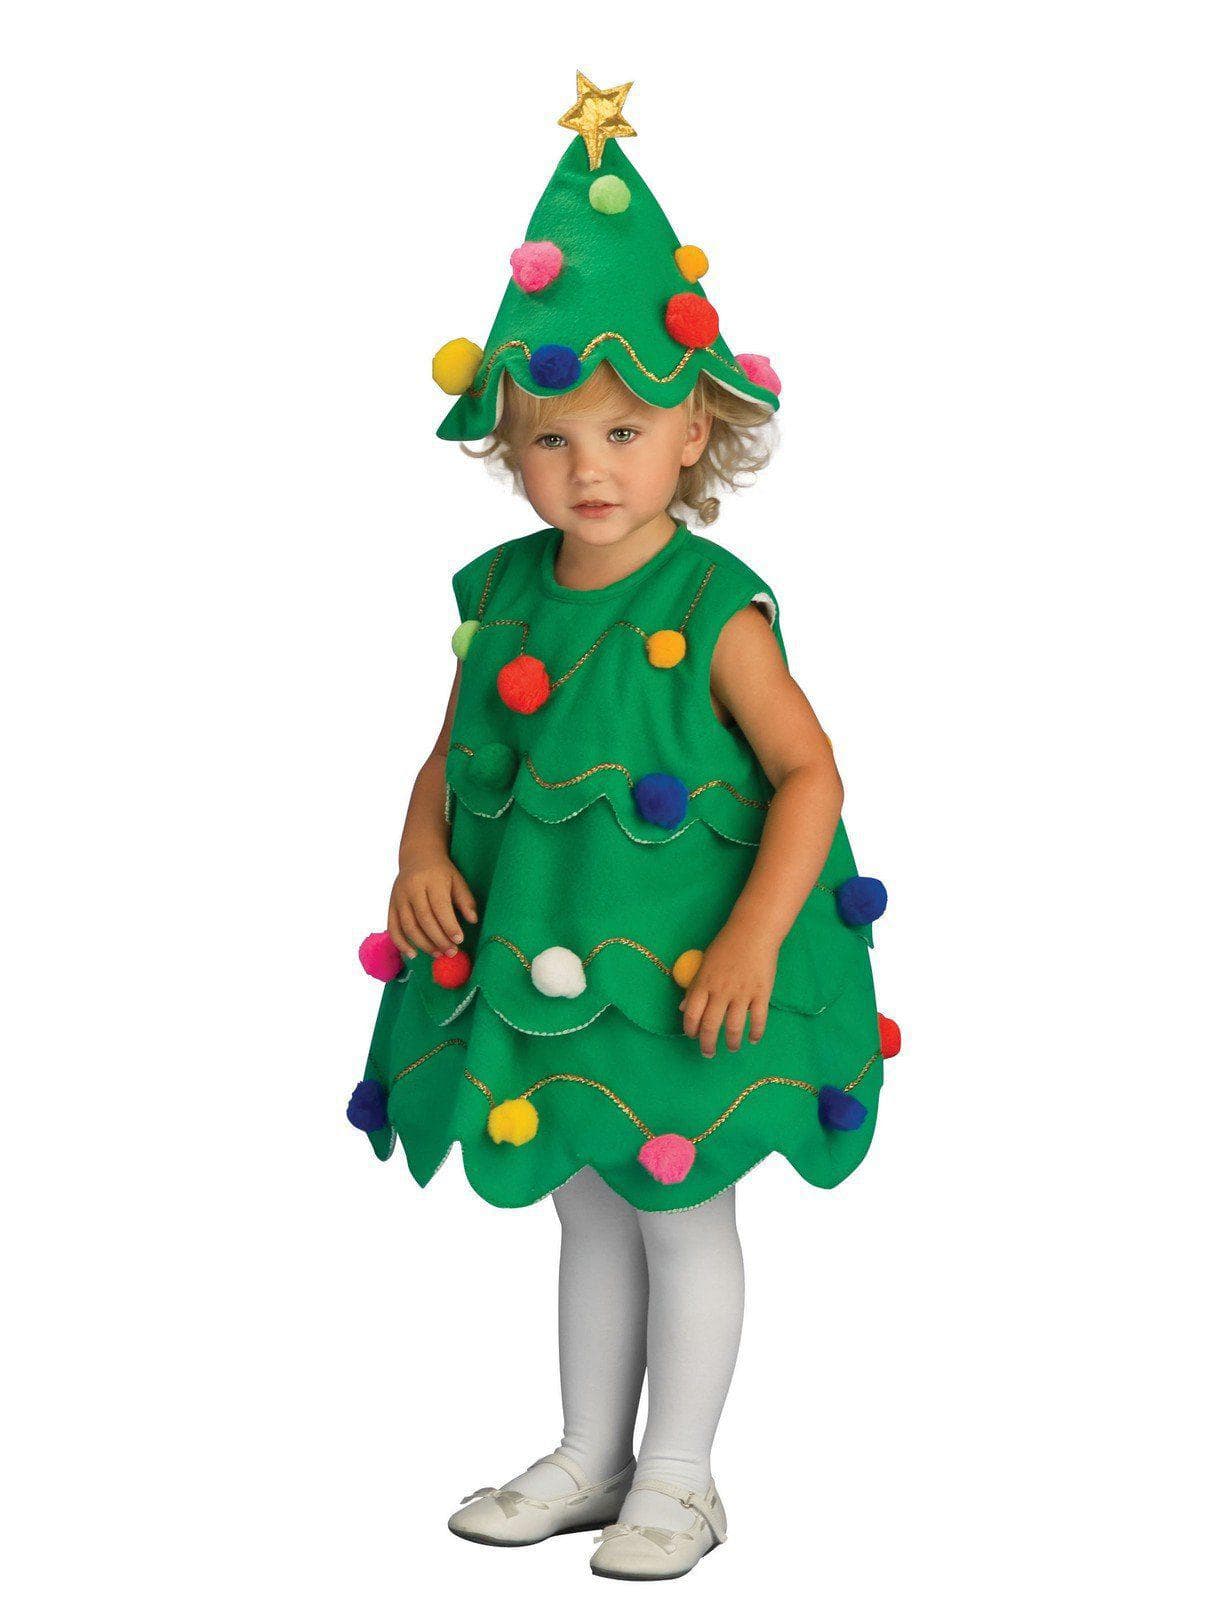 Baby/Toddler Lil Xmas Tree Costume - costumes.com